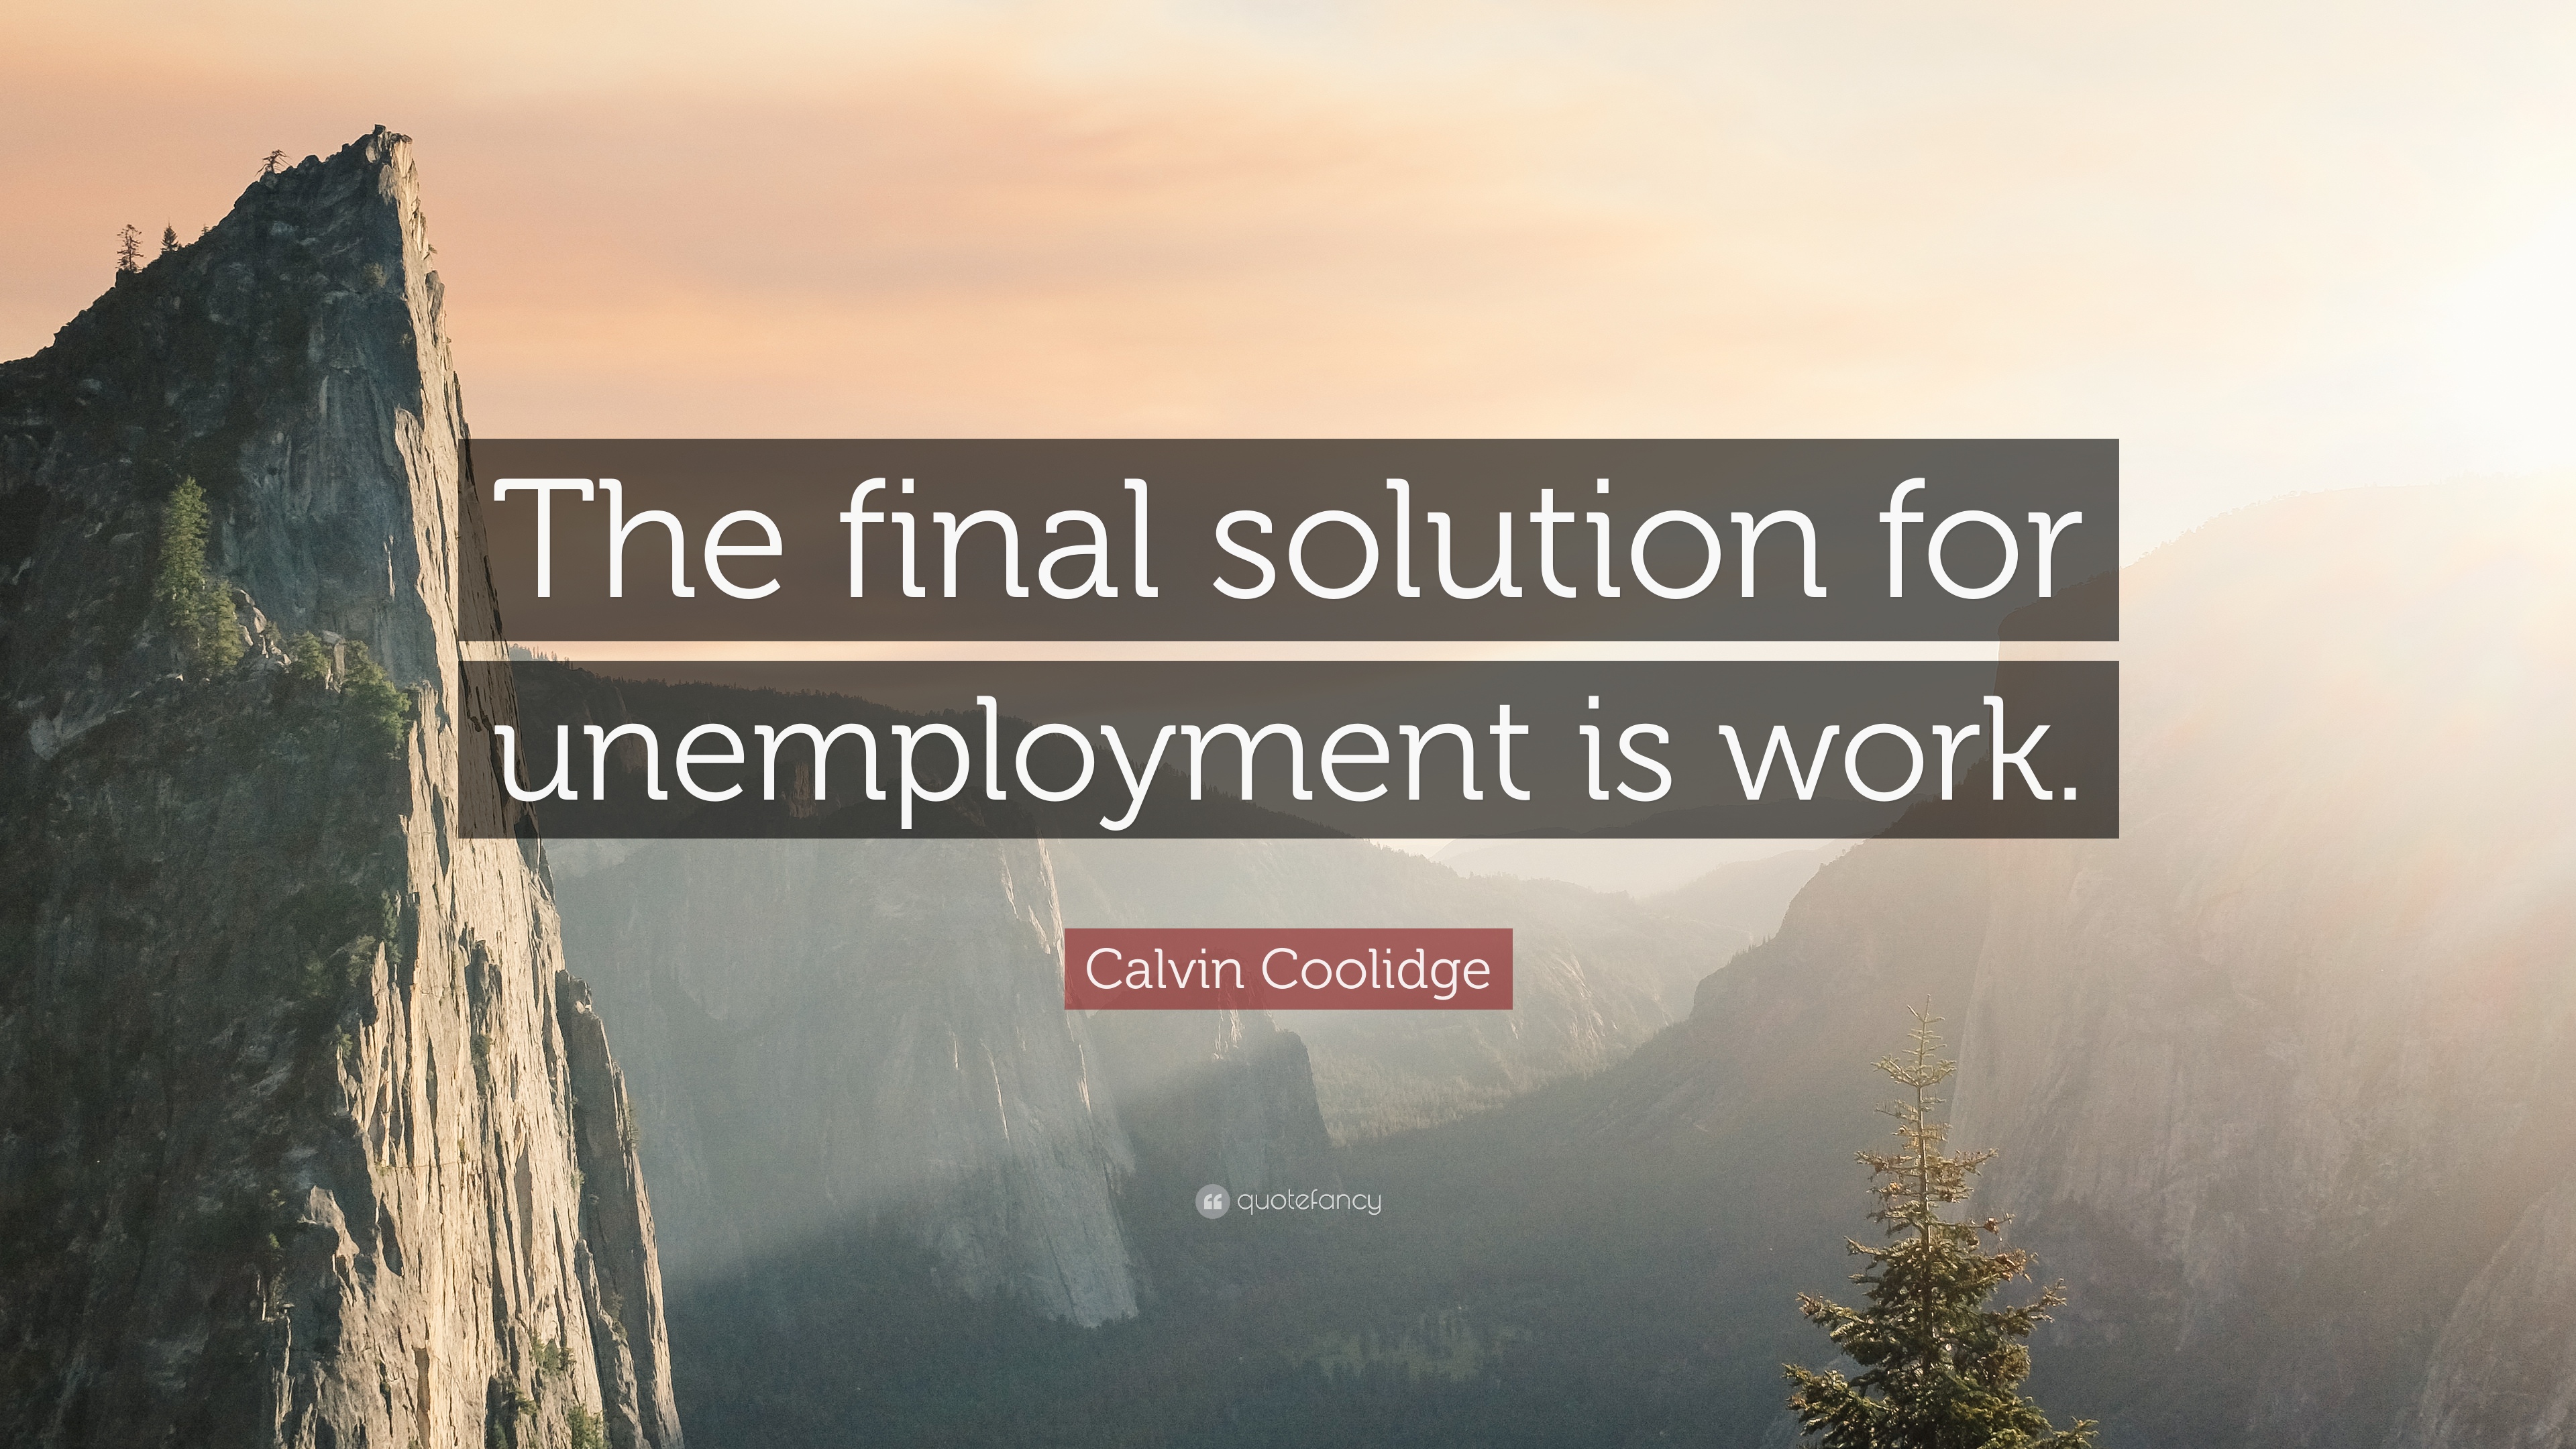 Calvin Coolidge Quote: “The final solution for unemployment is work.”